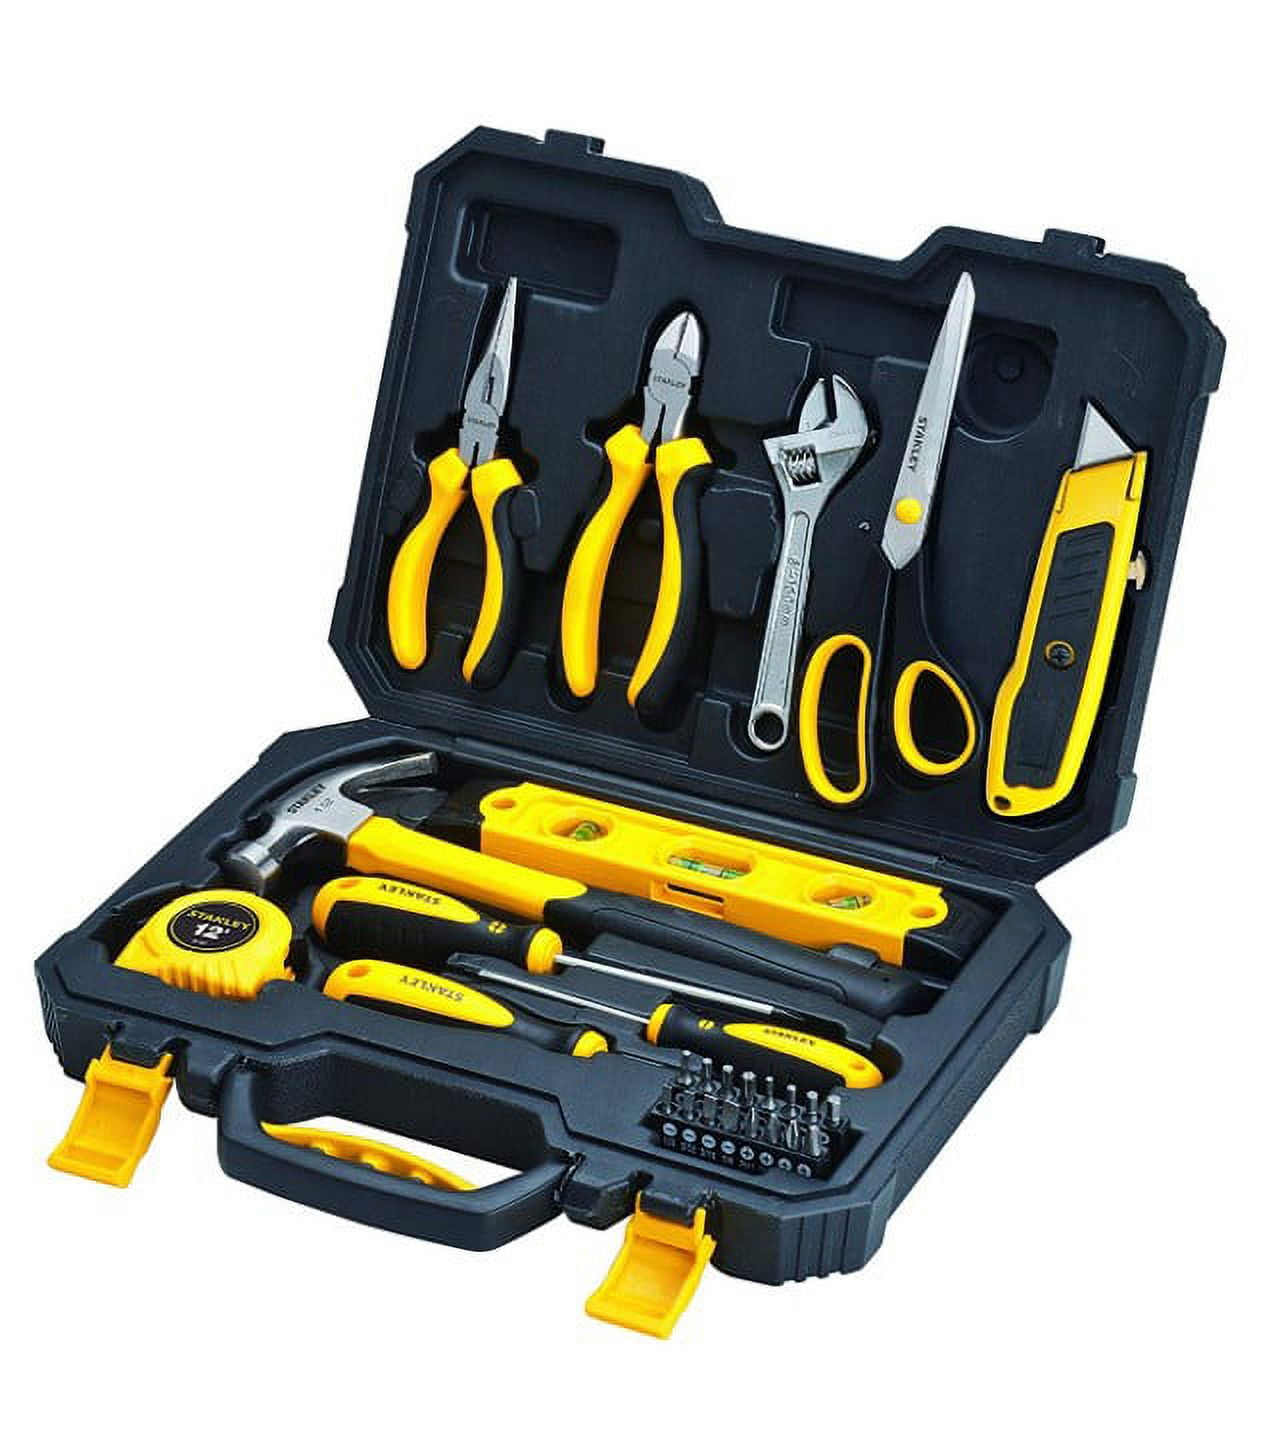 Stanley Hand Tools for Sale, Shop New & Used Hand Tools